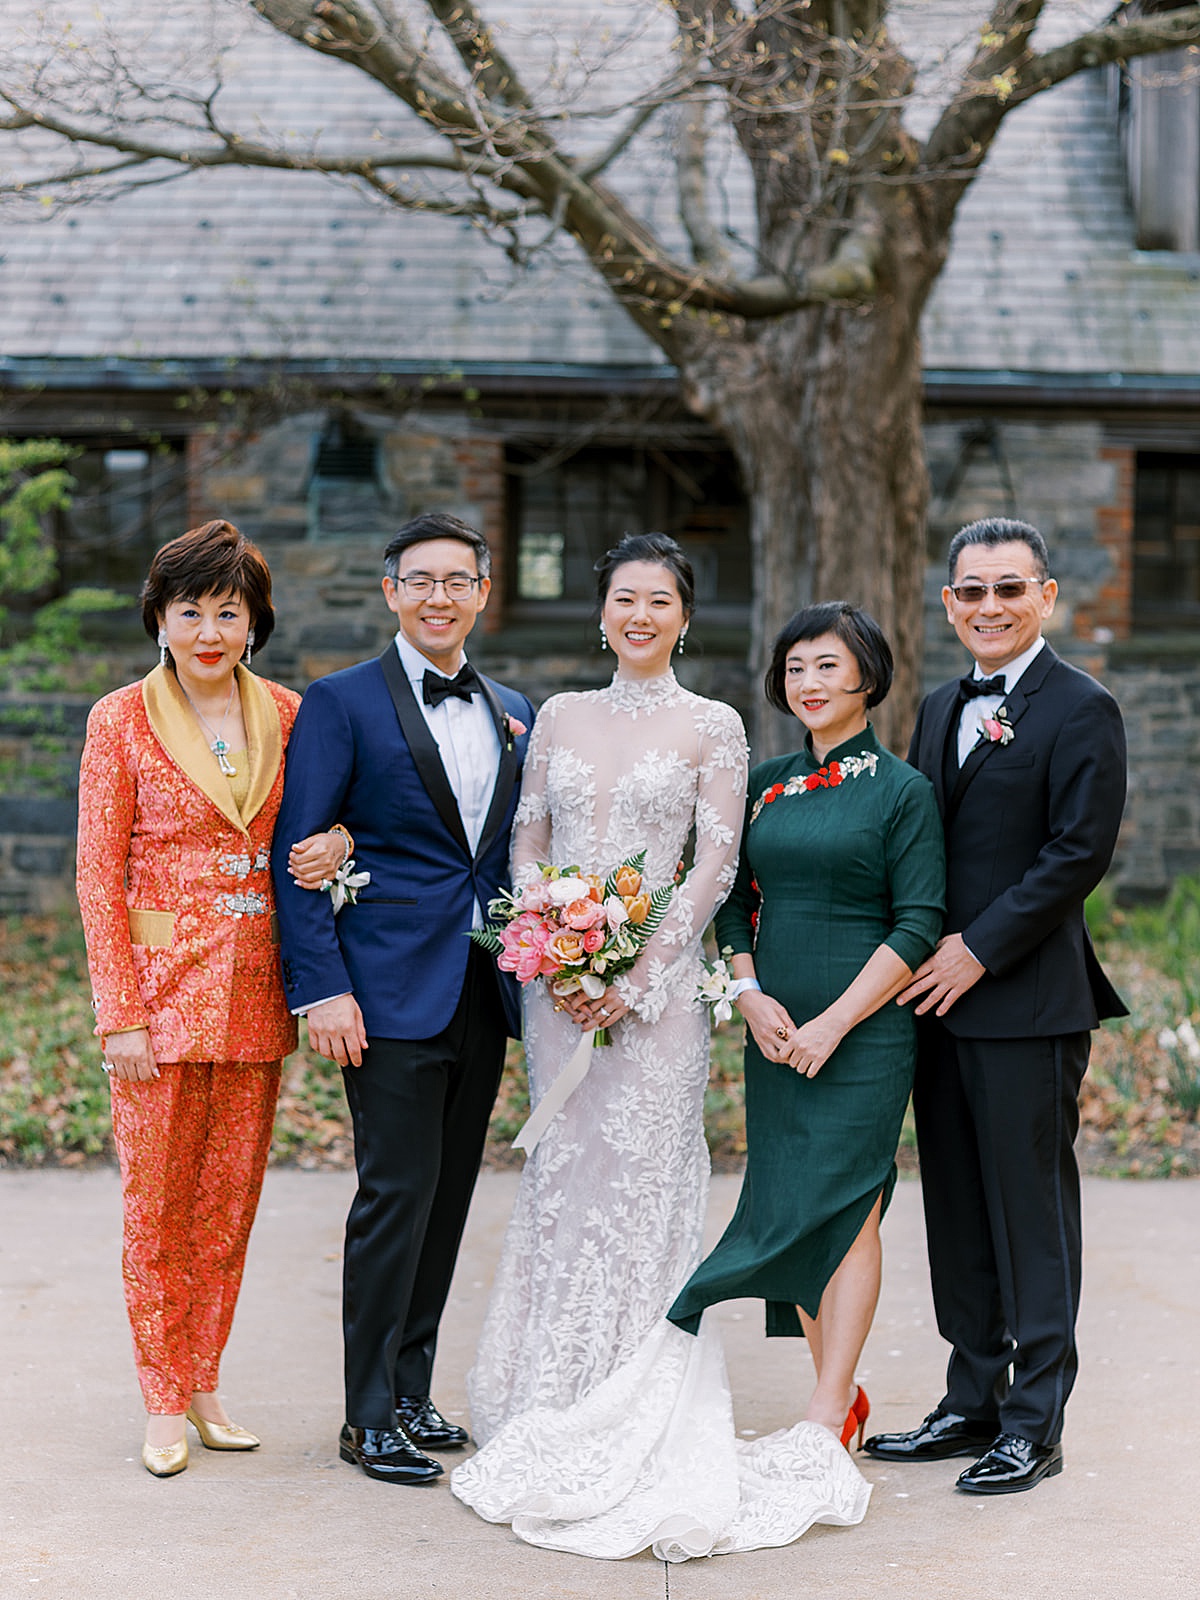 Bride and groom pose for family photo with parents at elegant wedding shot by Sophie Kaye Photography